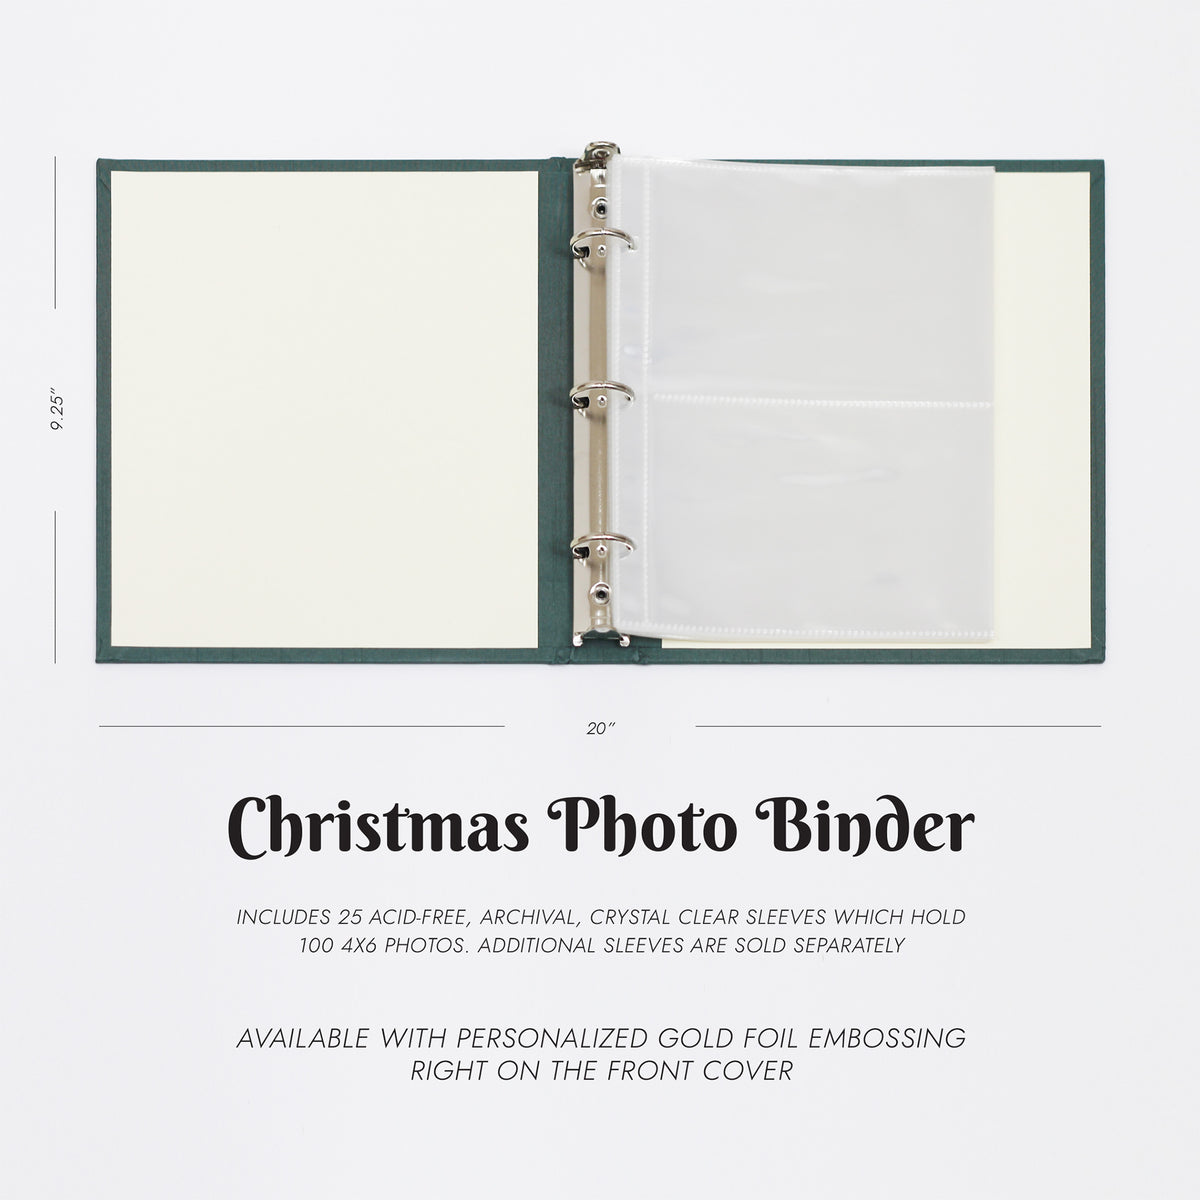 Medium Christmas Photo Binder with Champagne Silk Cover for 4x6 Photos